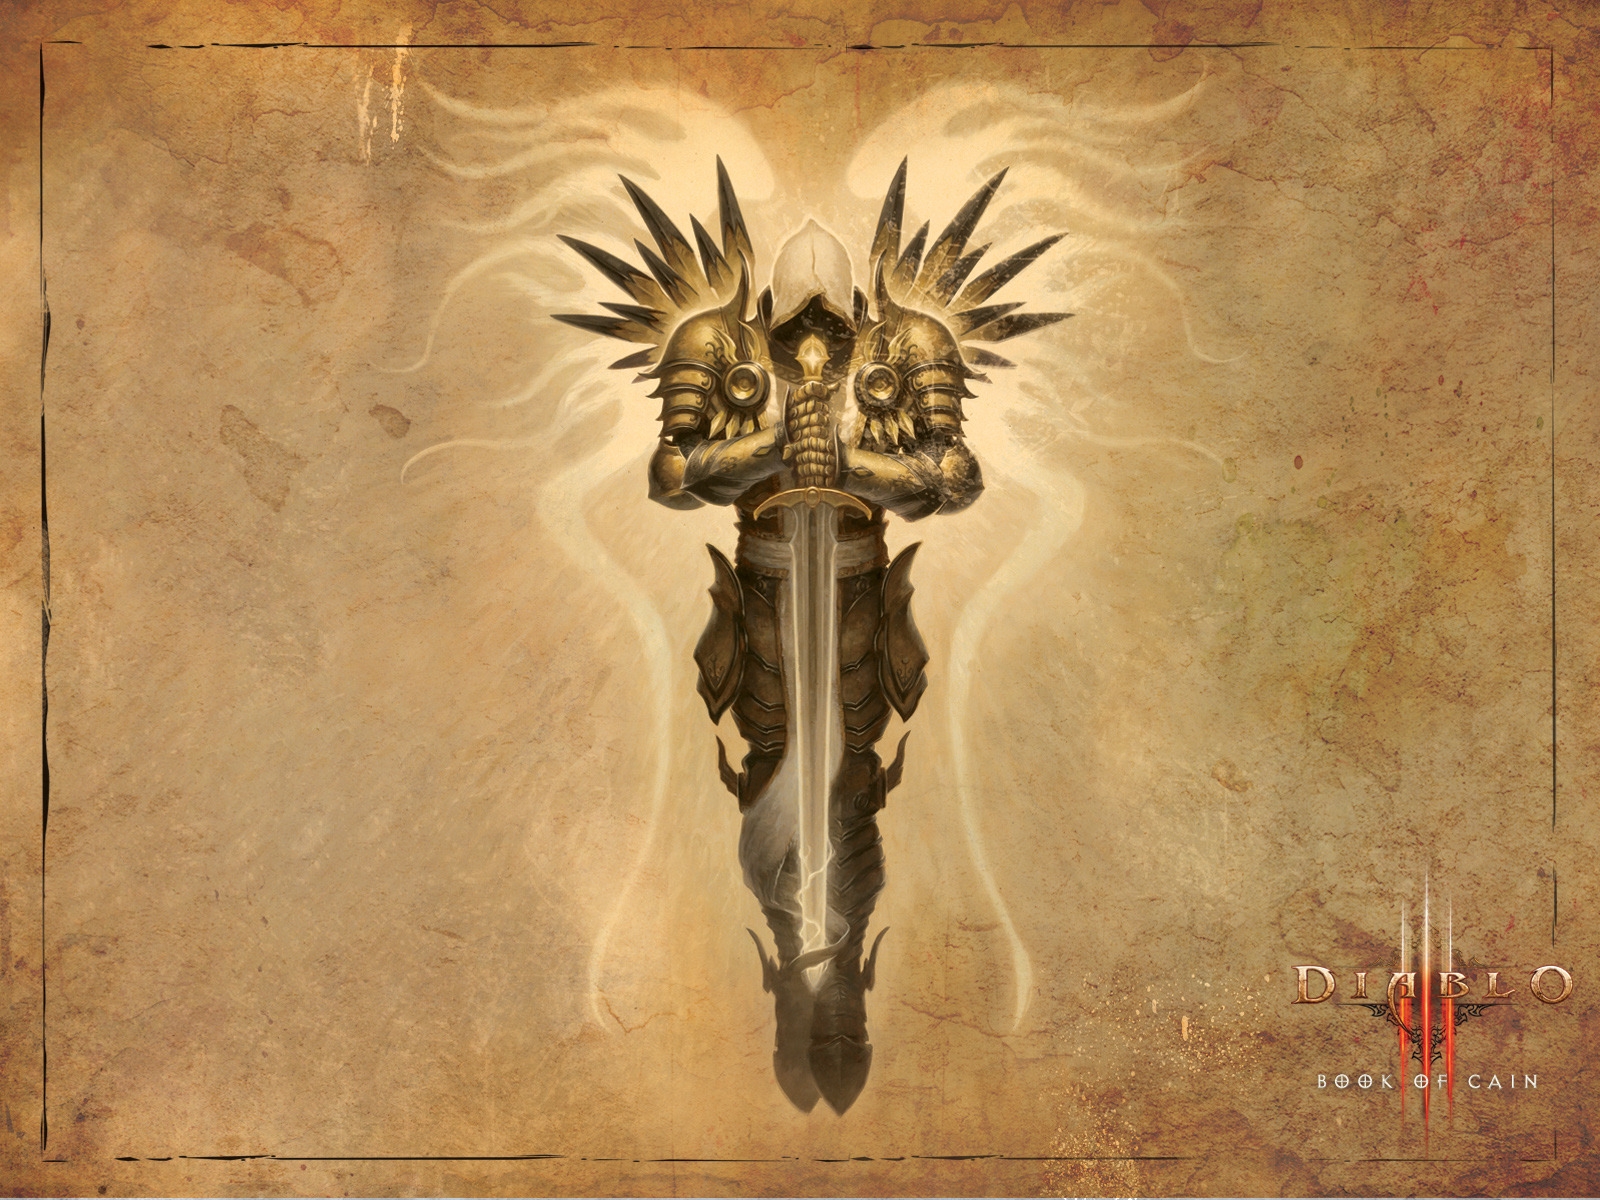 Book of Cain Diablo 3 for 1600 x 1200 resolution